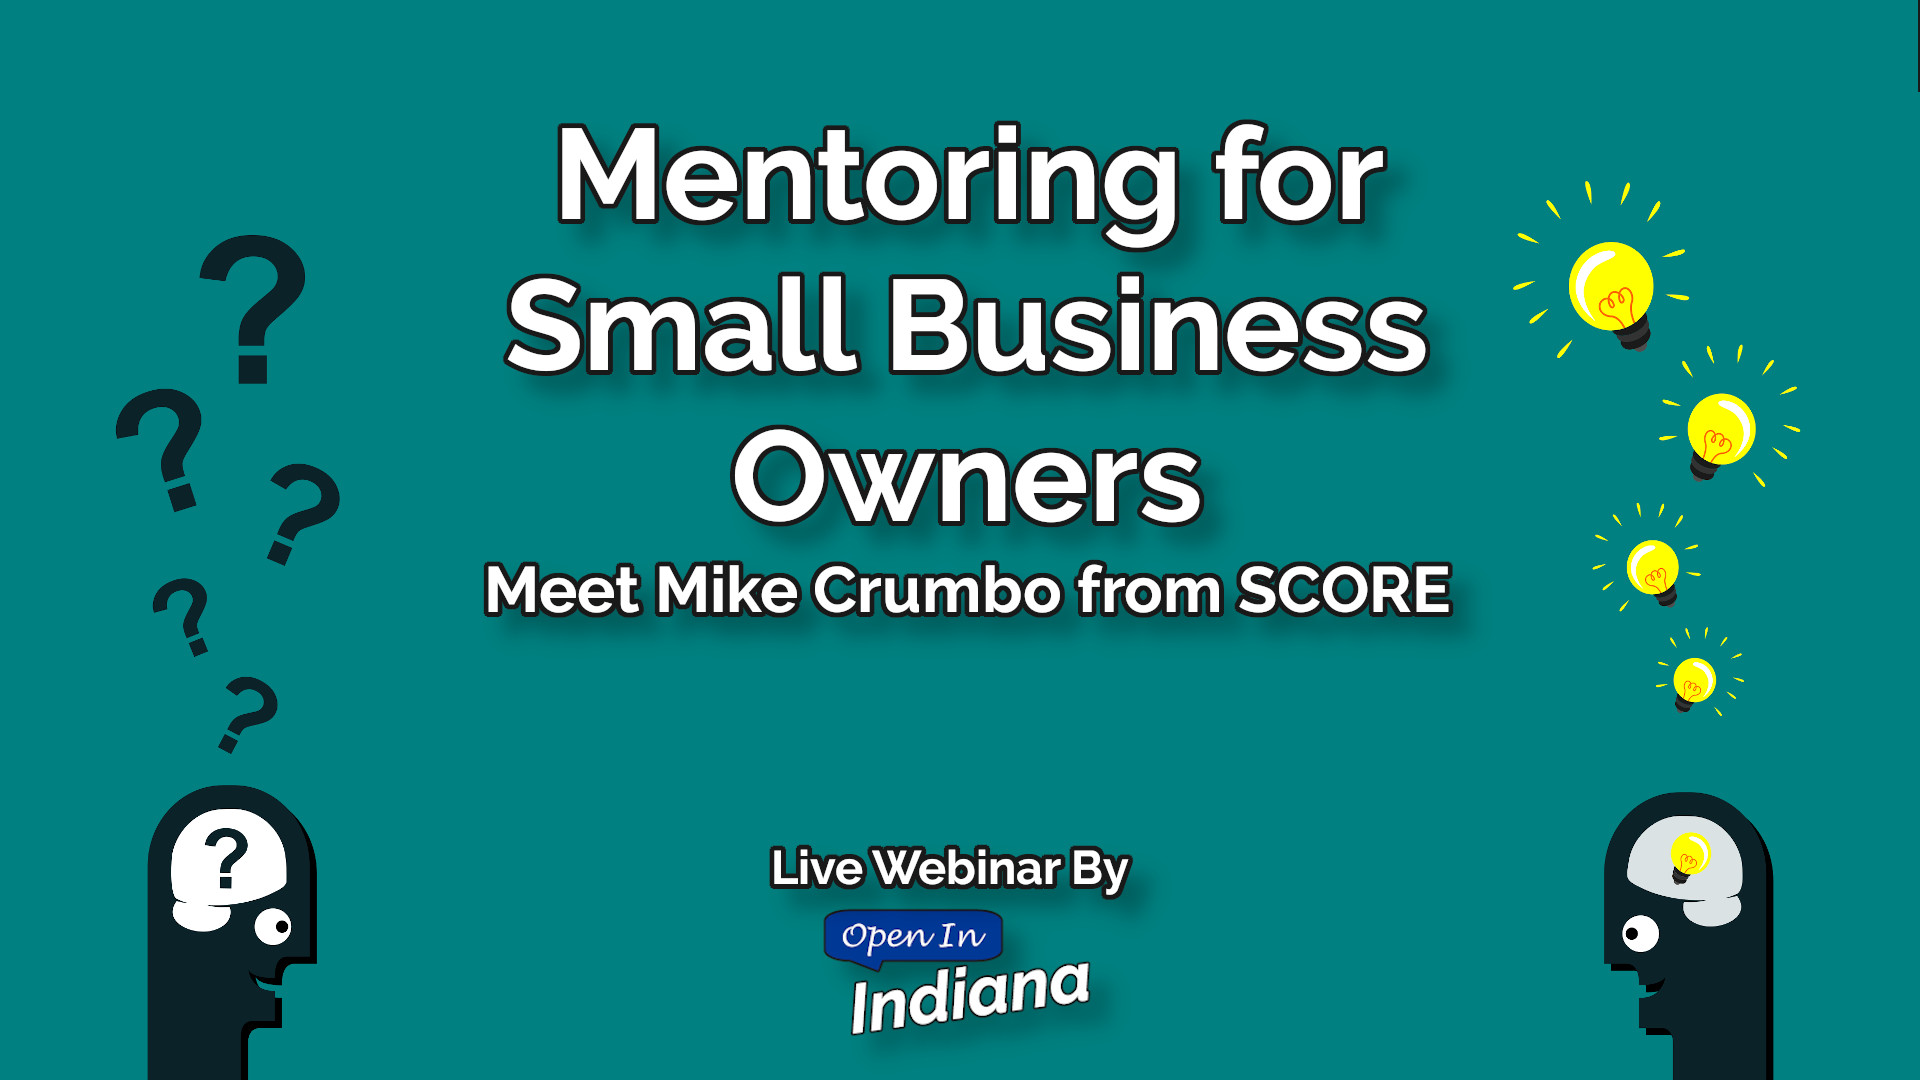 Mentoring for Small Business Owners, Meet Mike Crumbo from SCORE, Live webinar by Open In Indiana/INSPIREsmall.biz, with 2 heads facing each other, the one on the left has a bunch of question marks coming from the top of it, and the one on the right has light bulbs emanating from their head.